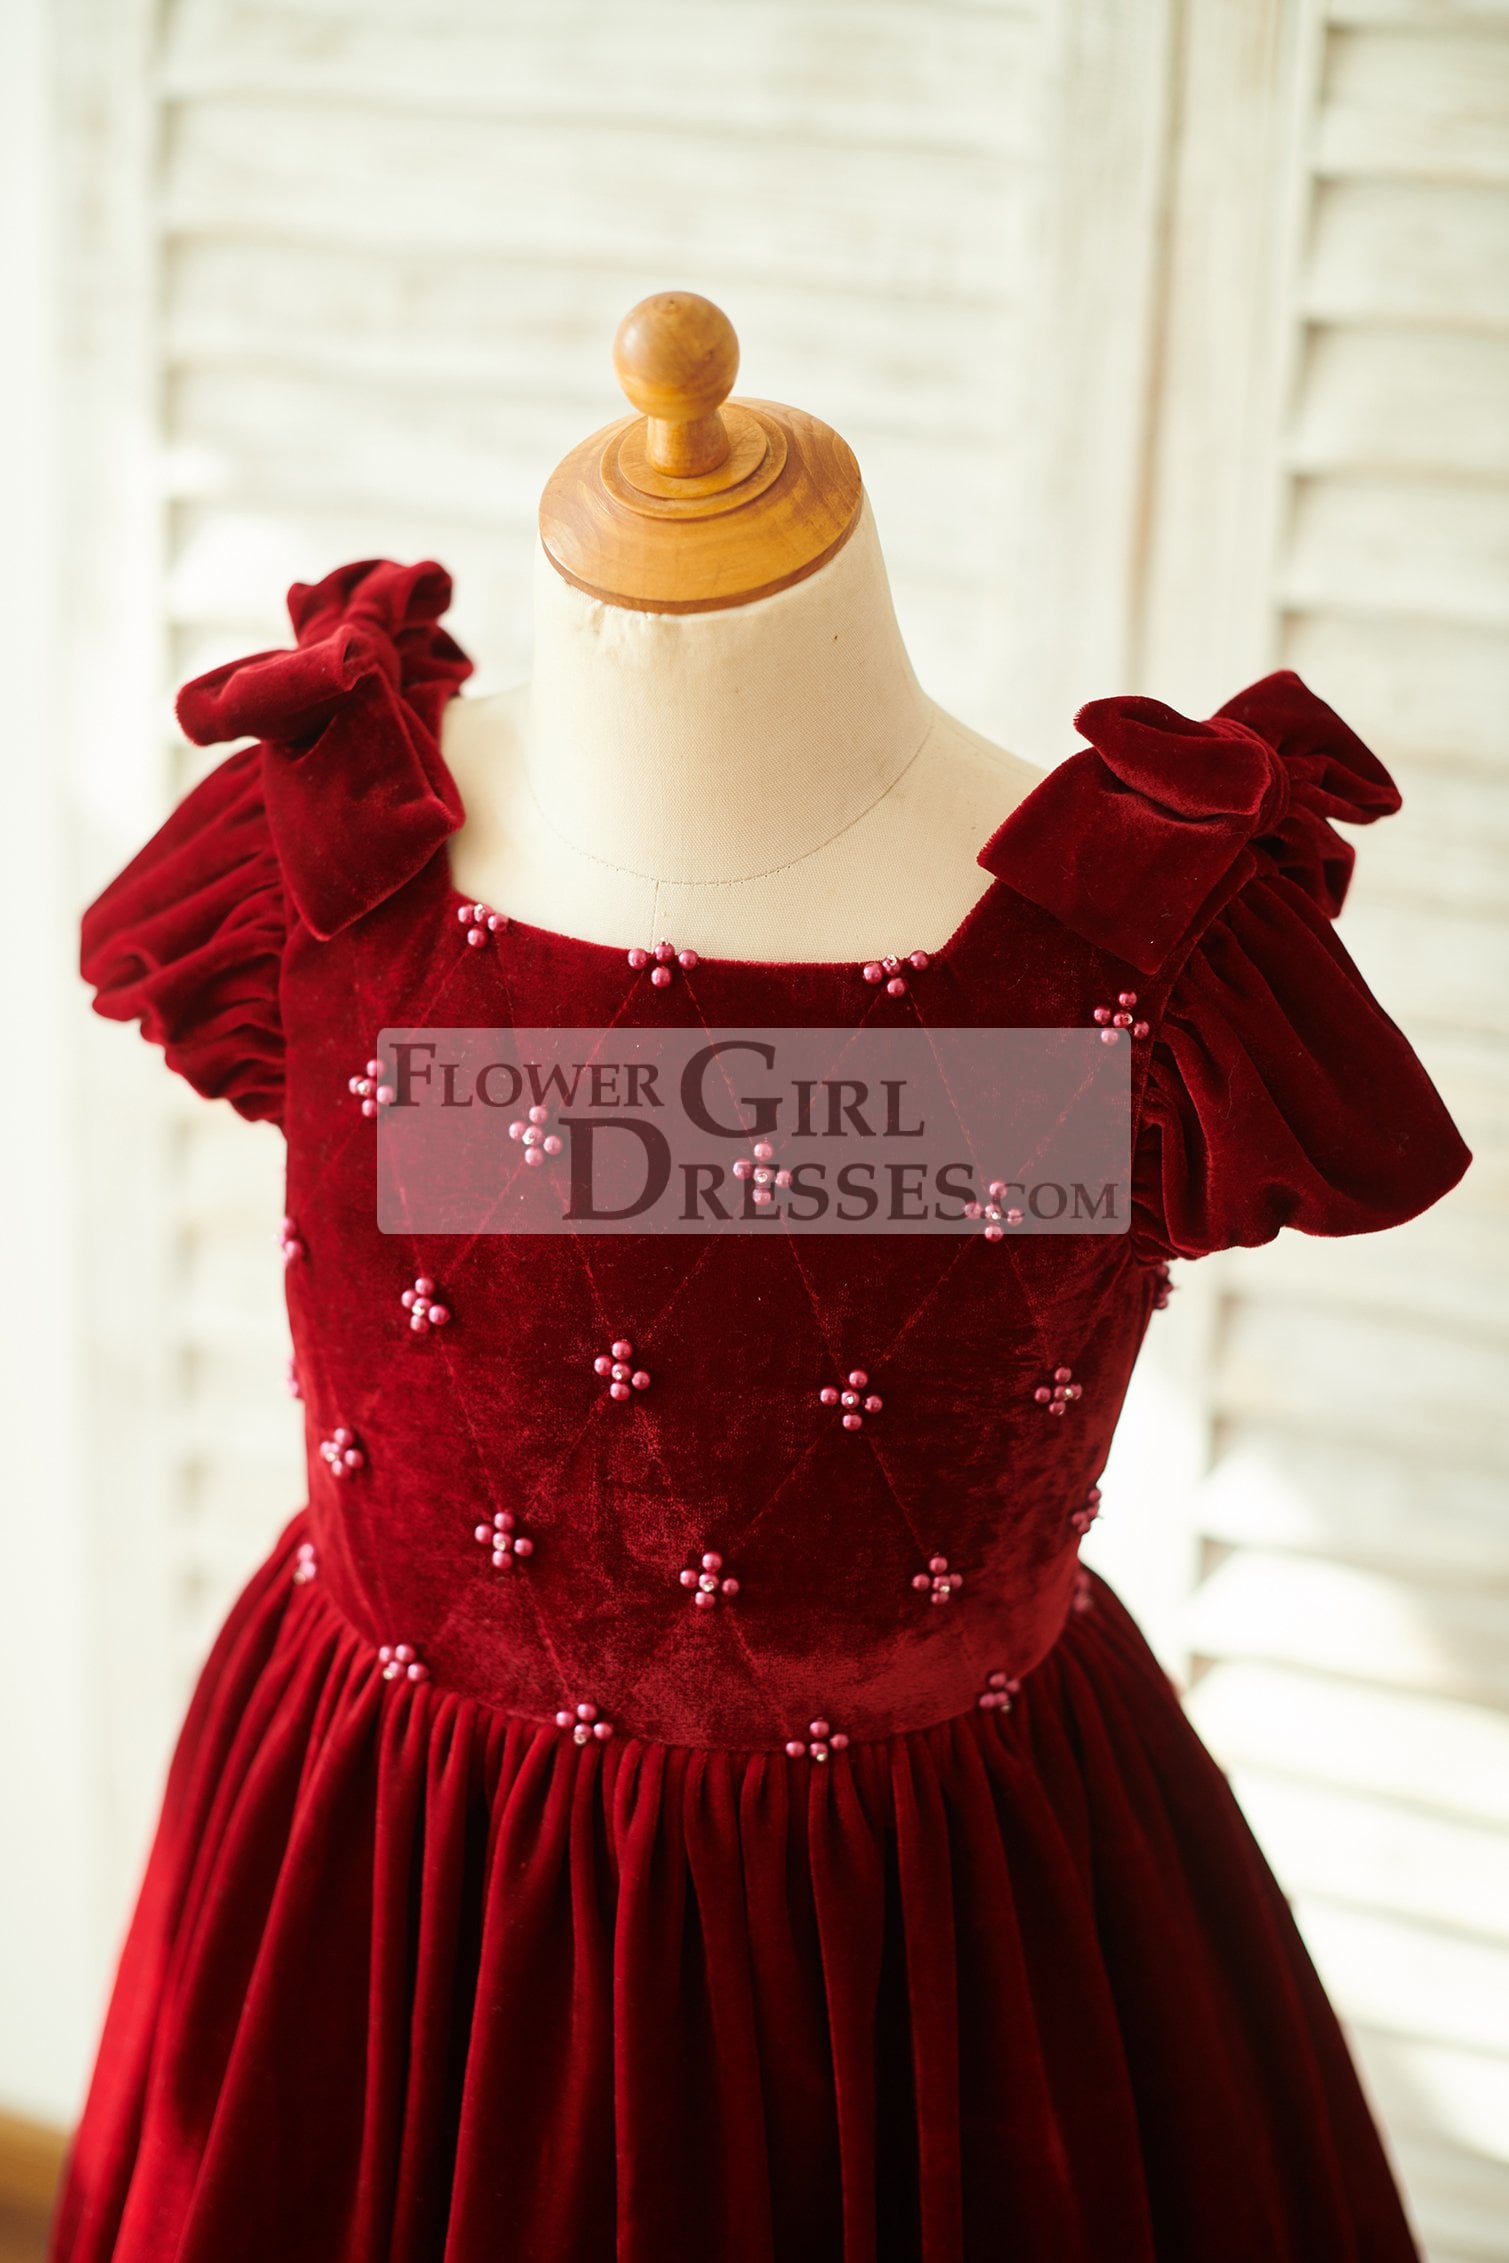 Buy Cilucu Flower Girl Dress Baby Toddlers Sequin Dress Tutu Kids Party Dress  Bridesmaid Wedding Gown Birthday Dress Wine Gold Burgundy 2T-3T at Amazon.in